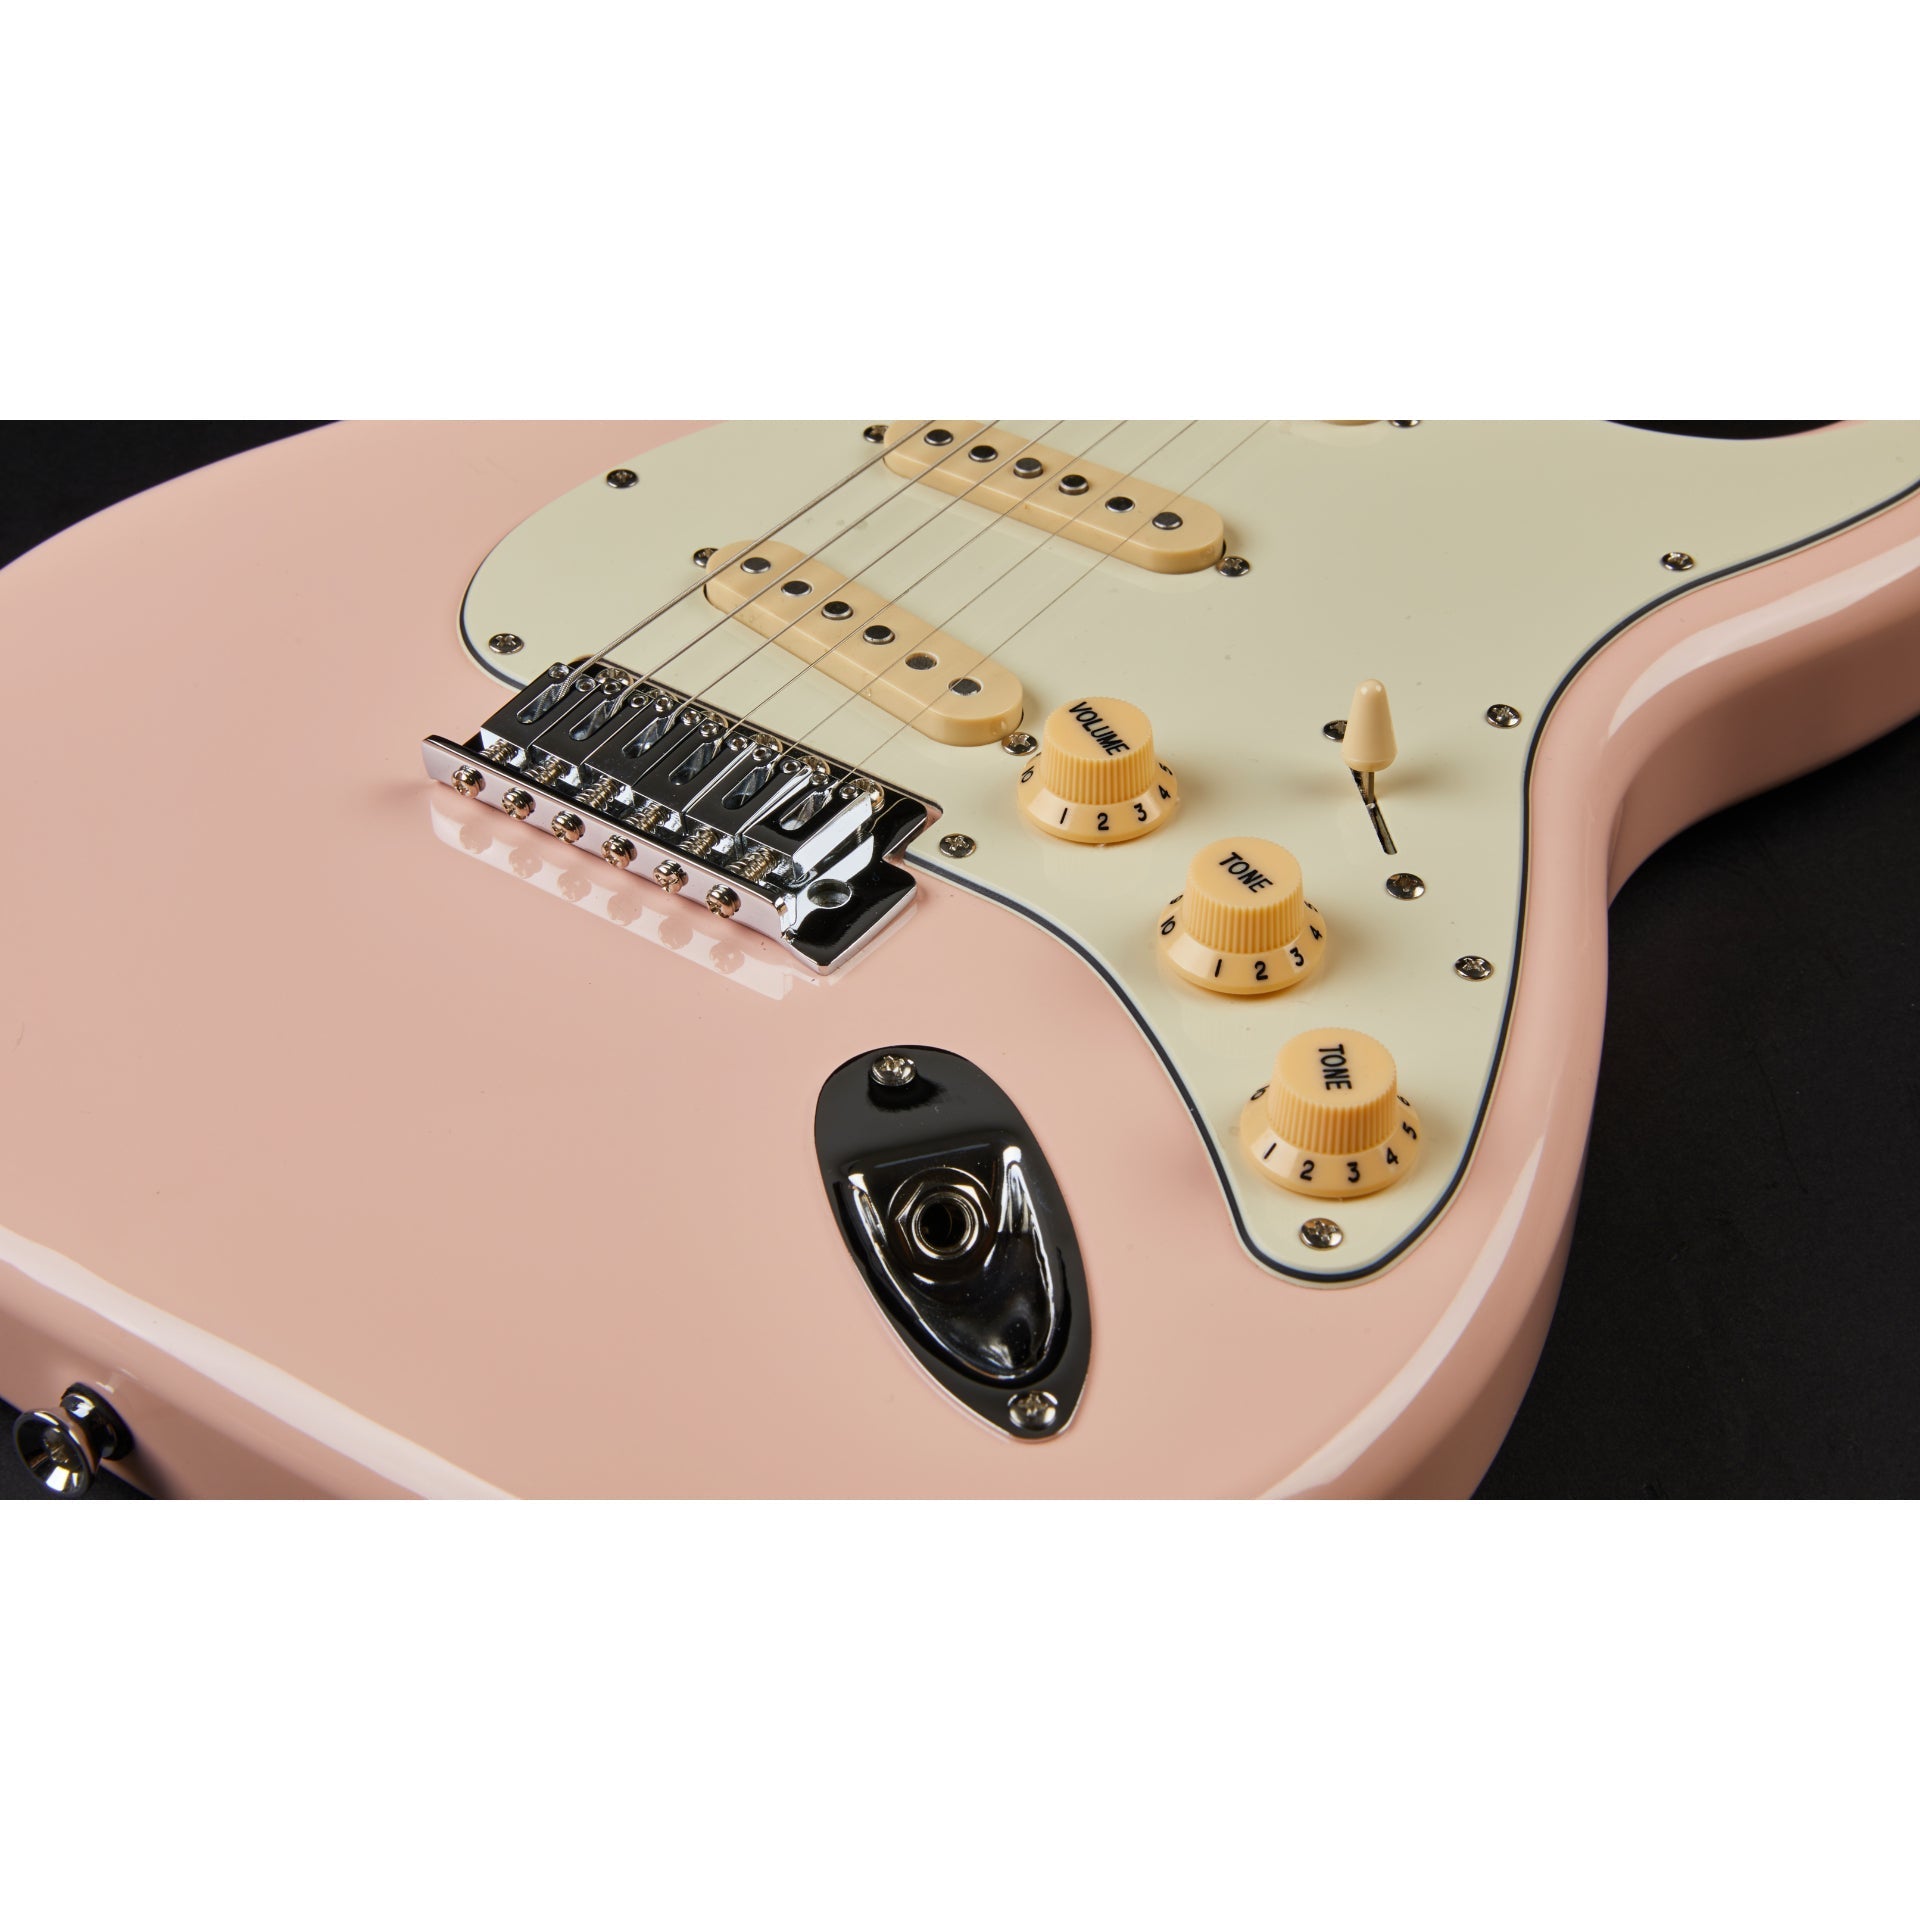 Đàn Guitar Điện Keipro Classic Series S-S-S Rosewood Fingerboard ST, Pink - Việt Music